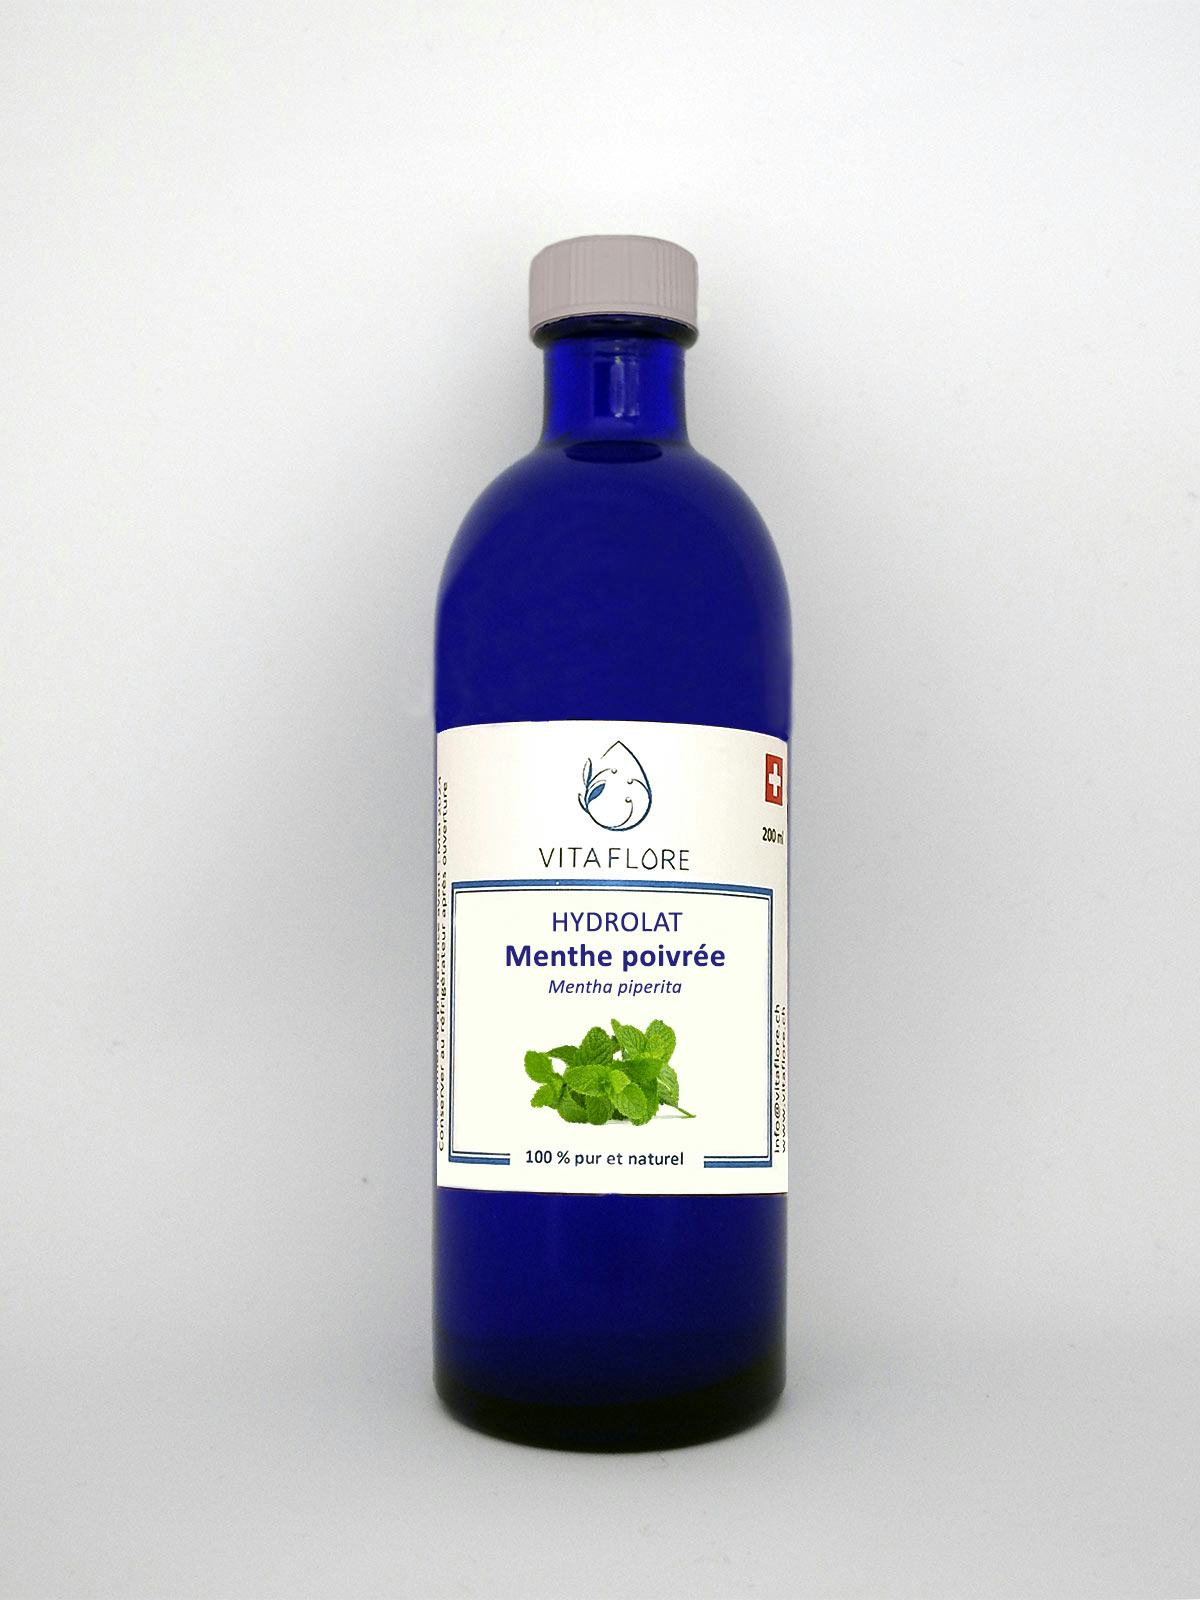 Peppermint hydrosol, artisanal product for direct sale in Switzerland